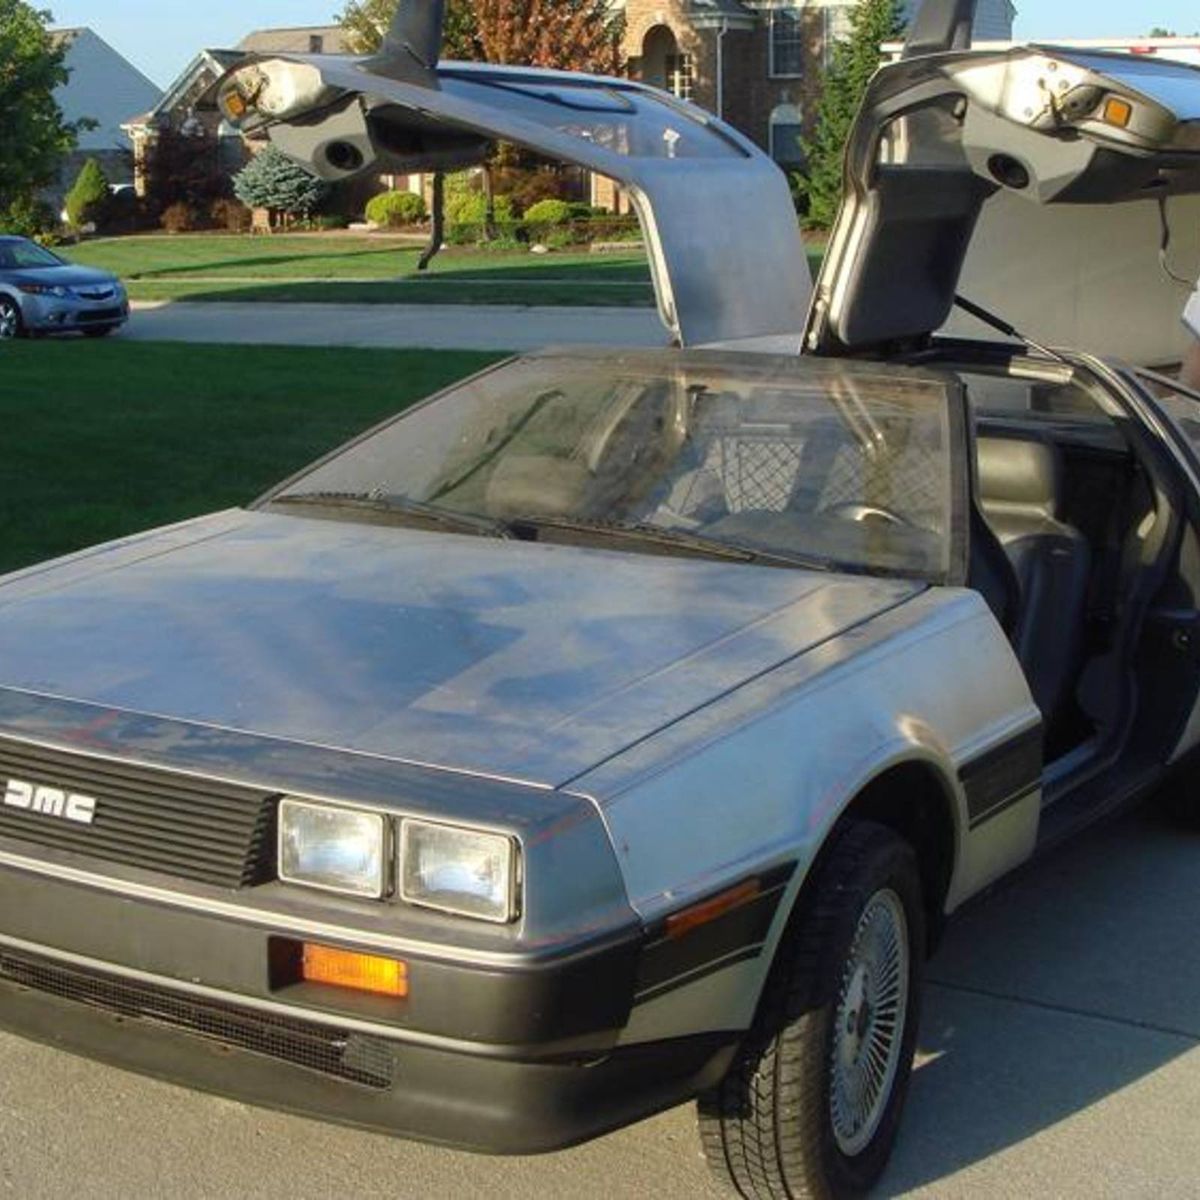 A Perfectly Restored DeLorean DMC-12 Could Be Yours